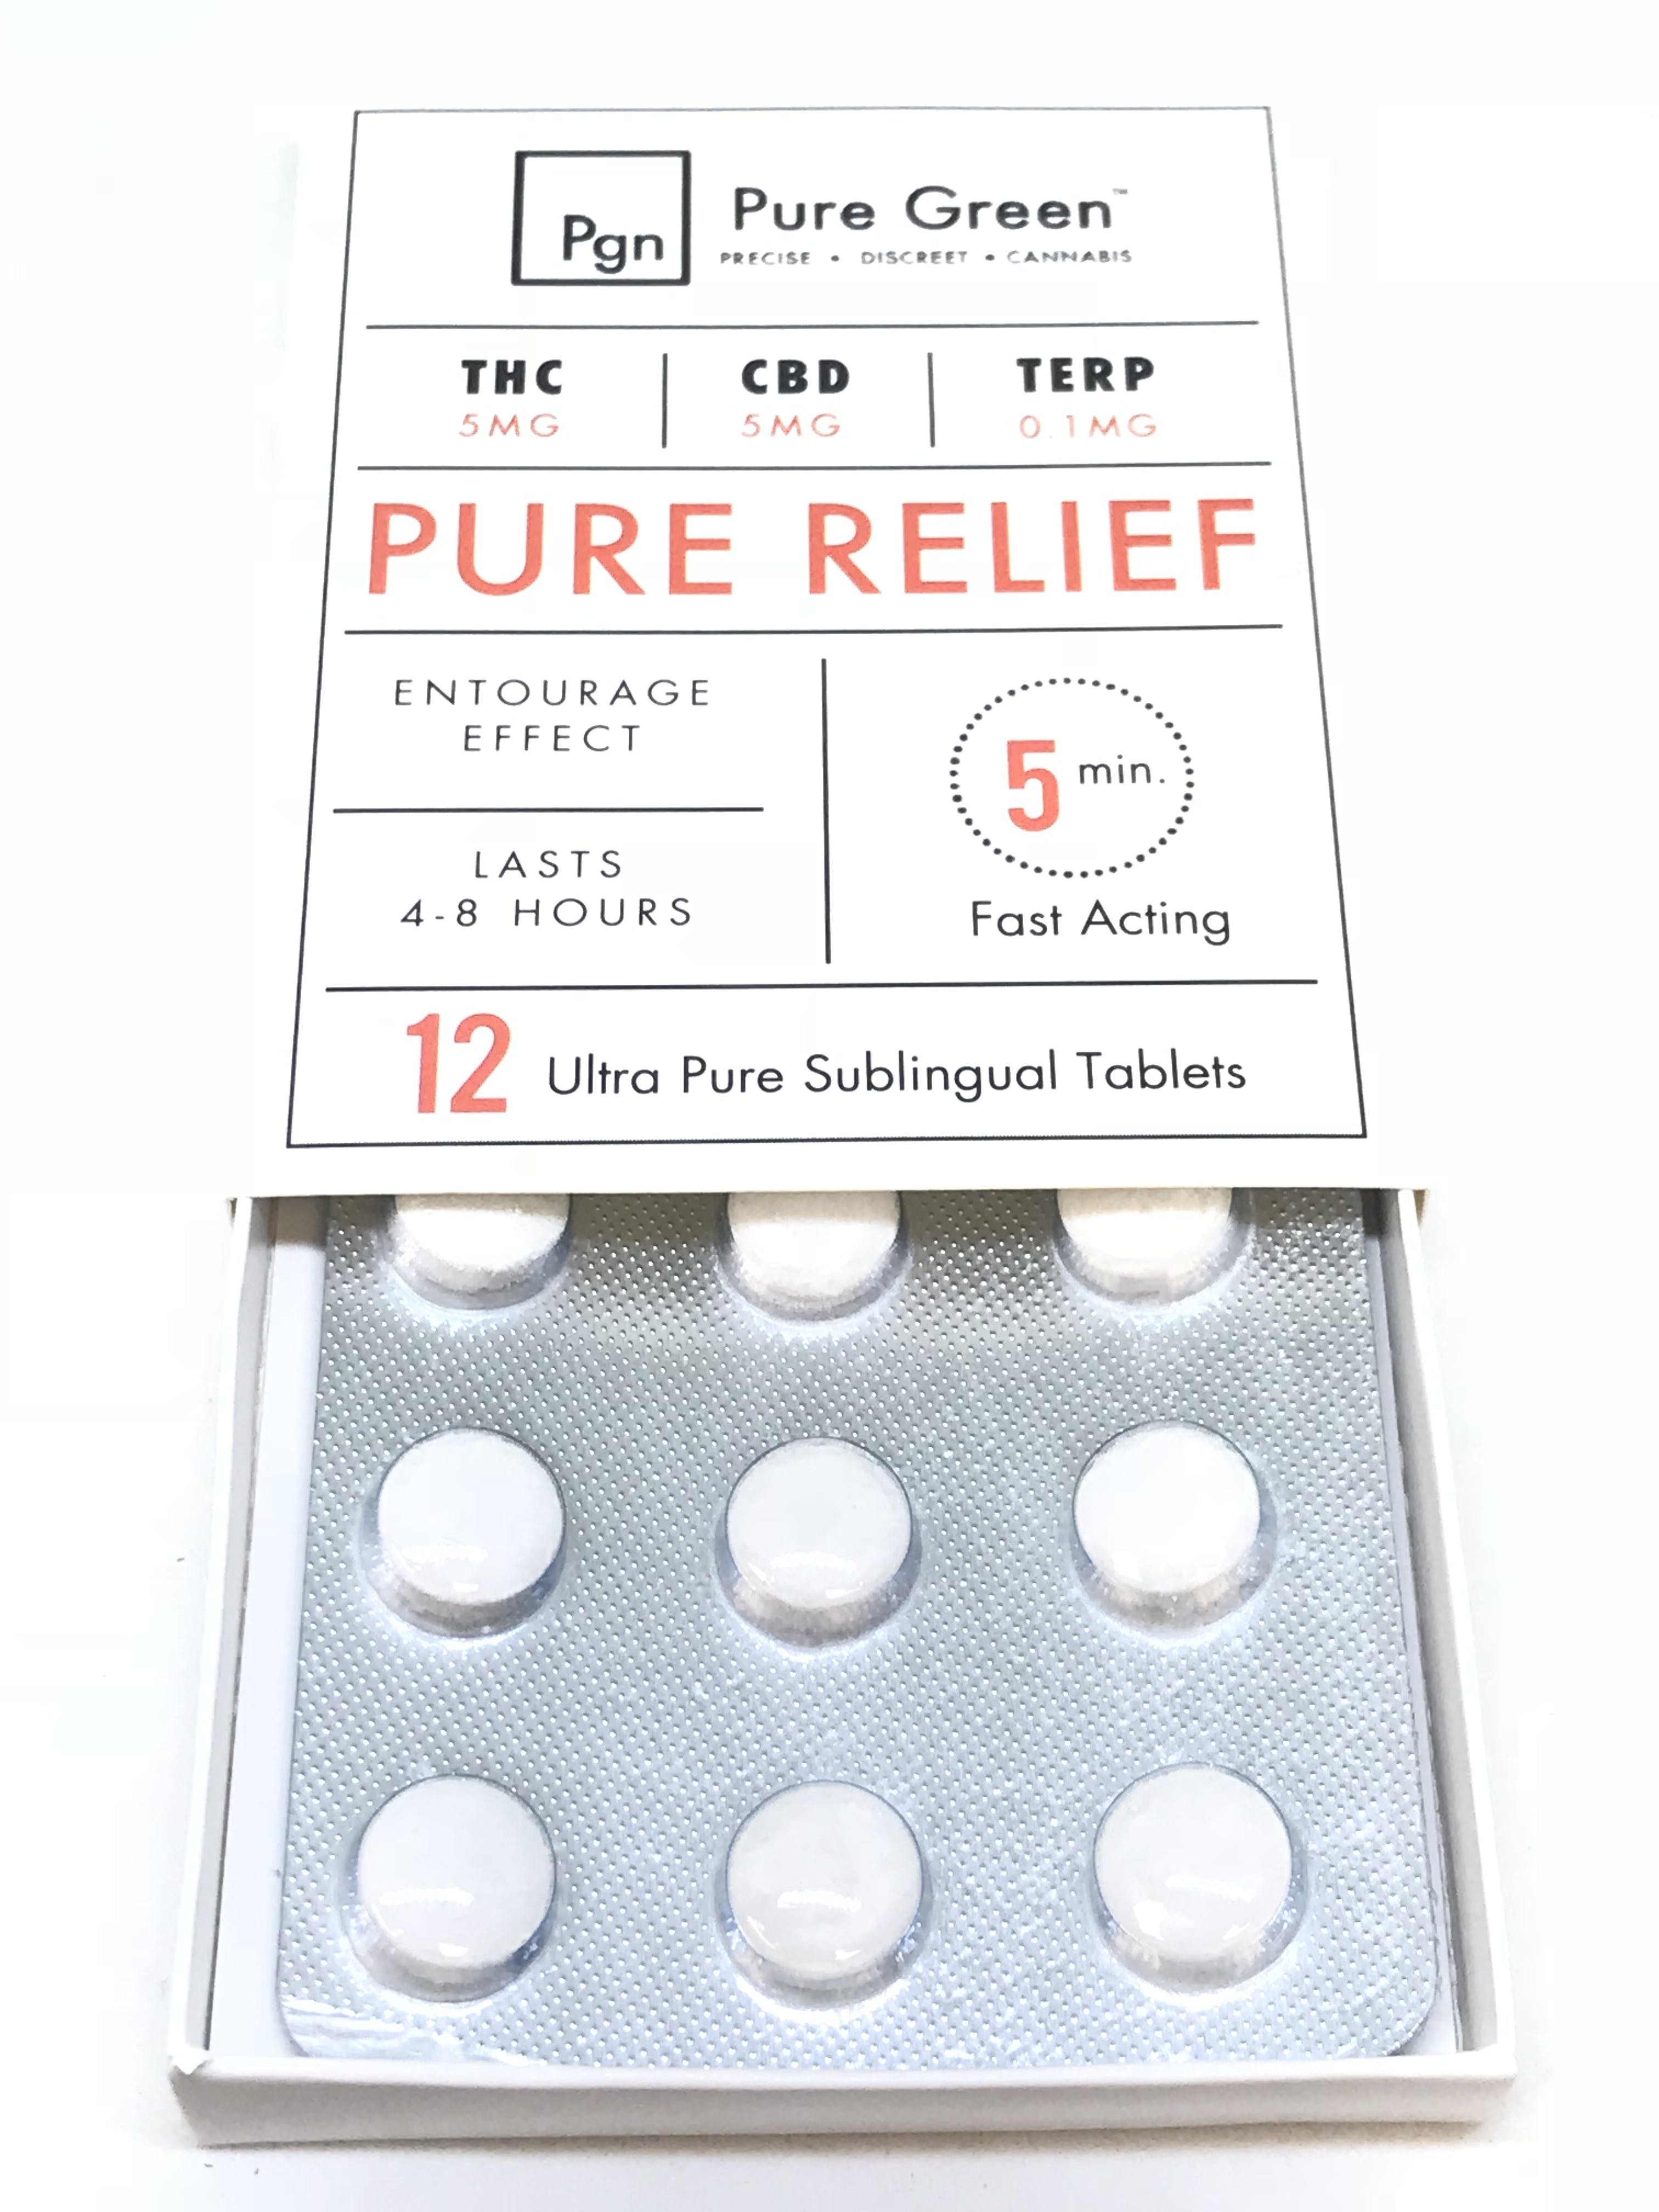 edible-pure-green-pure-relief-12-sublingual-tablet